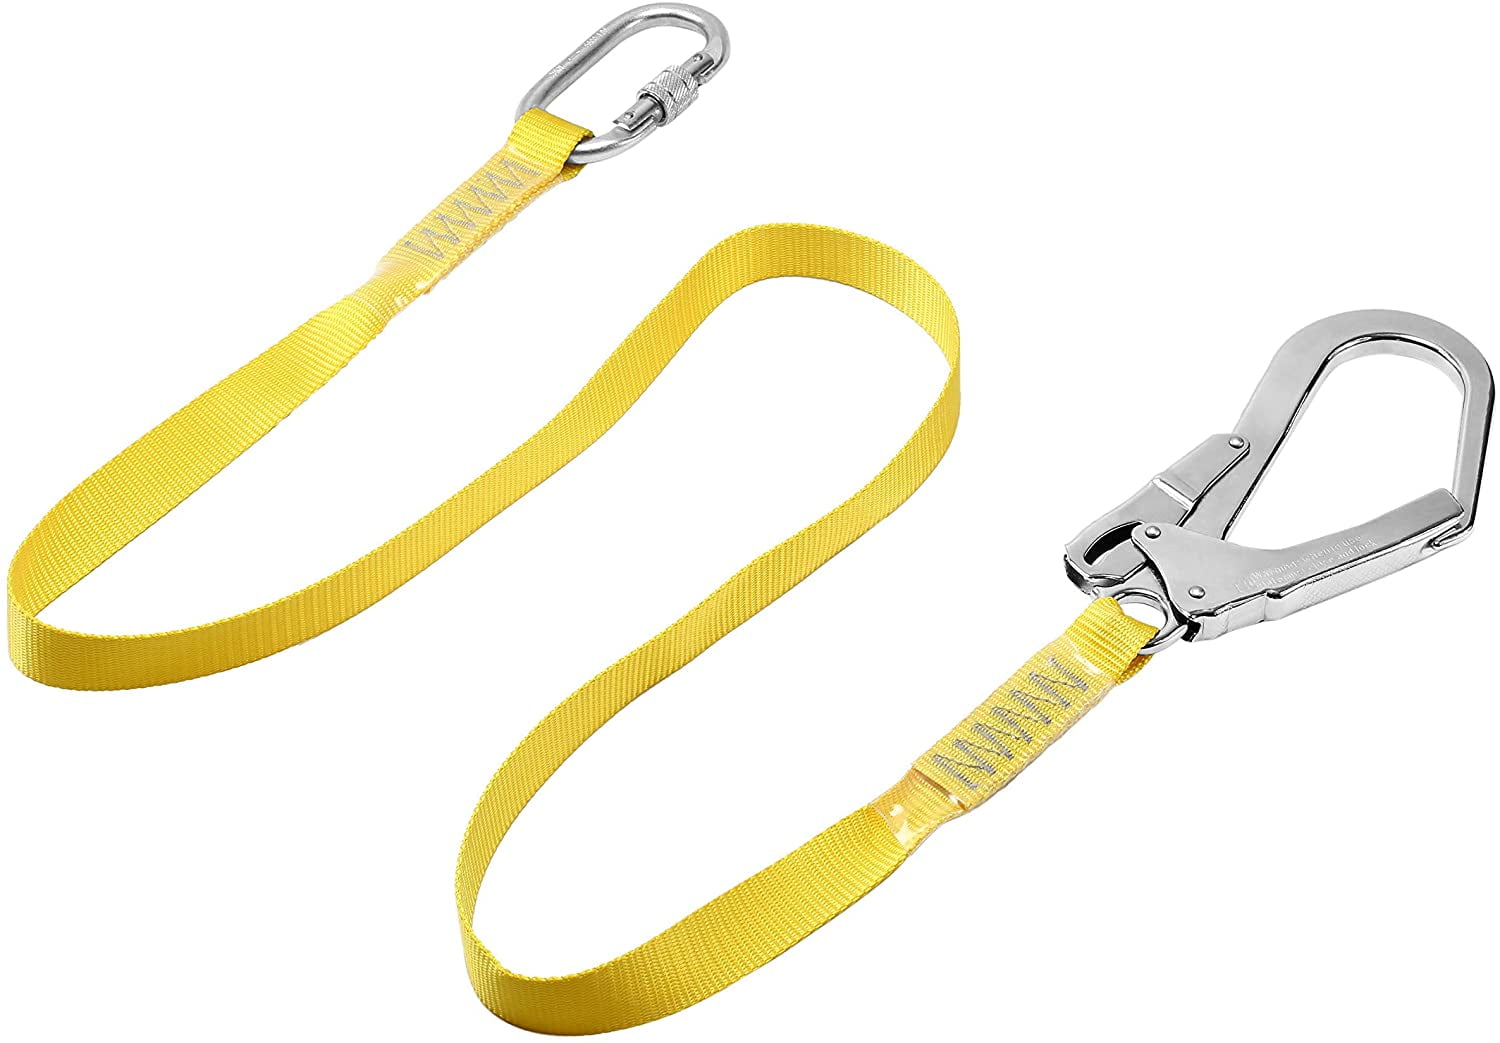 Fall Protection, Fall Protection With 1500kg, Polyester Webbing